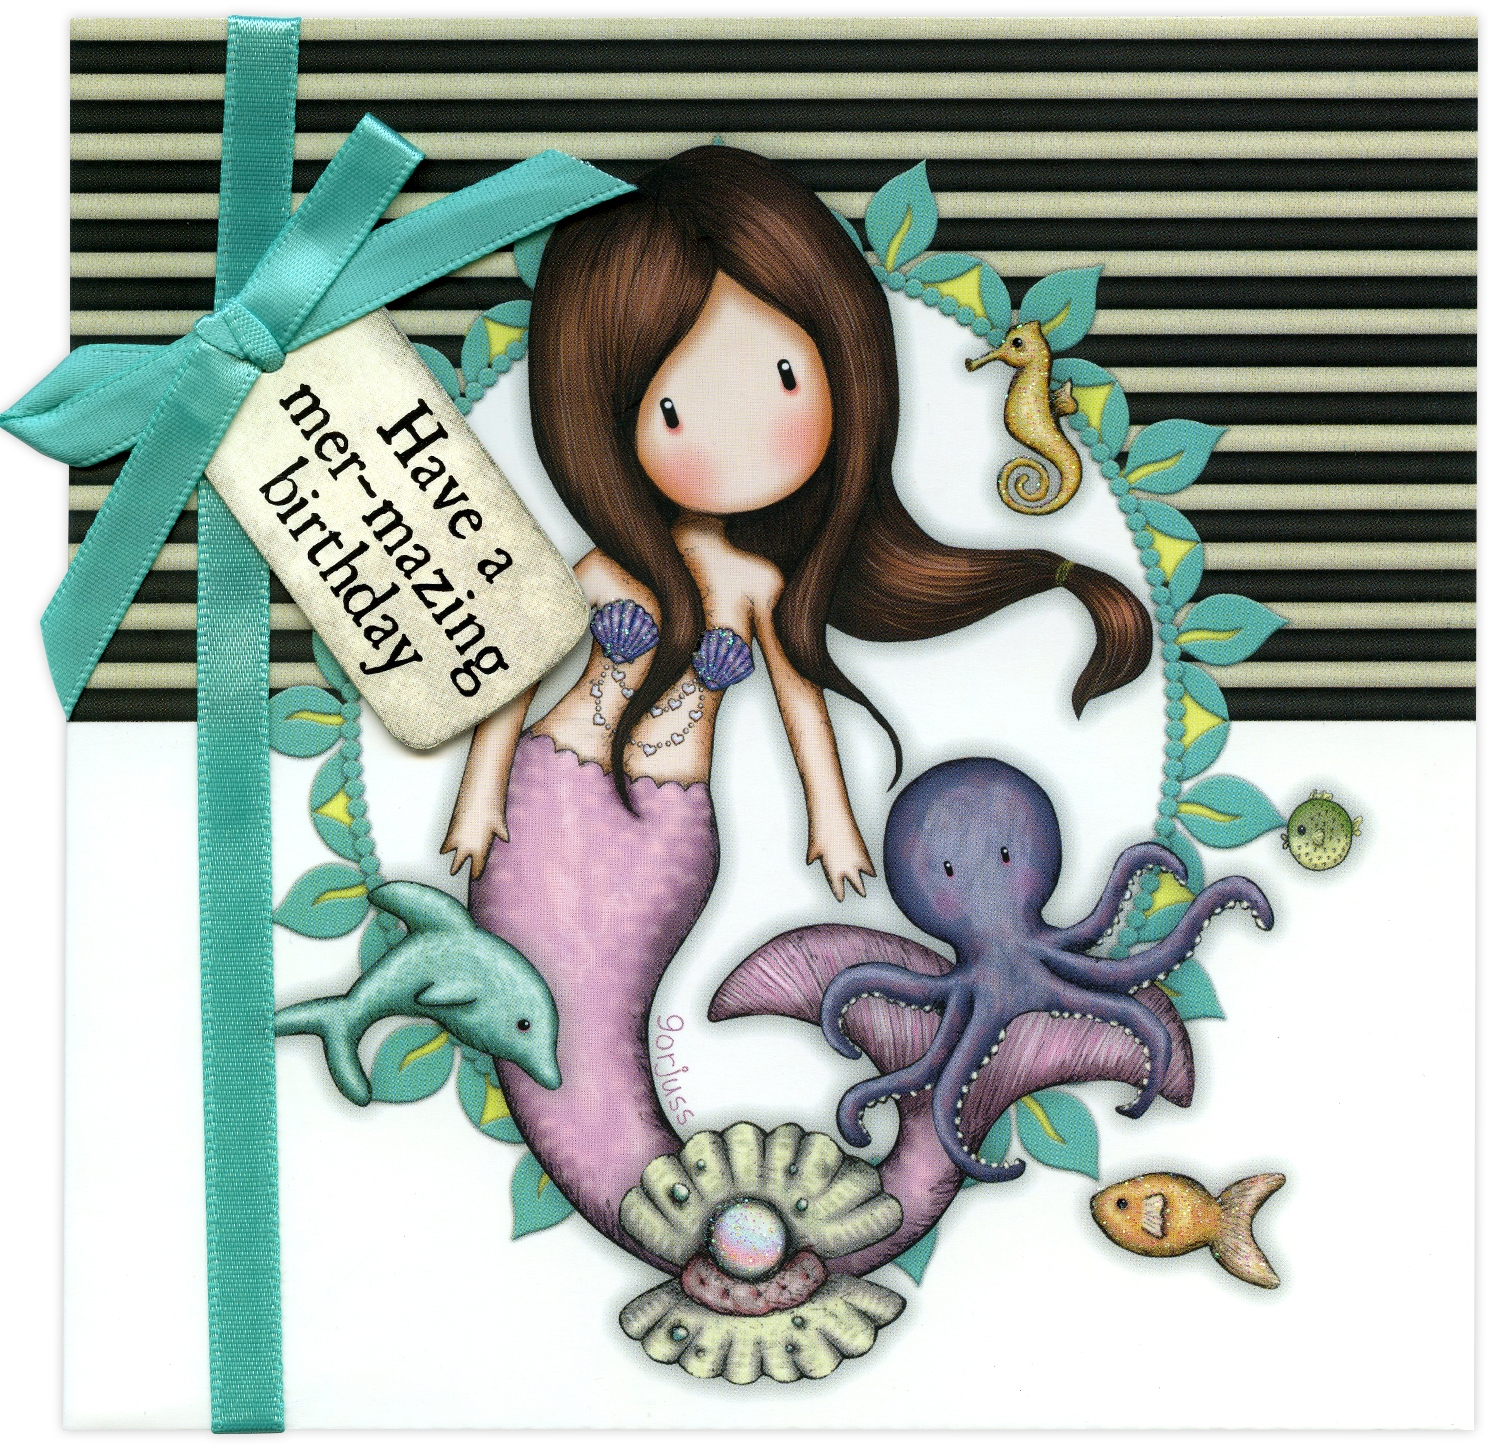 Above: One of the new Gorjuss card designs from Santoro that co-ordinates with a wealth of gift products. 